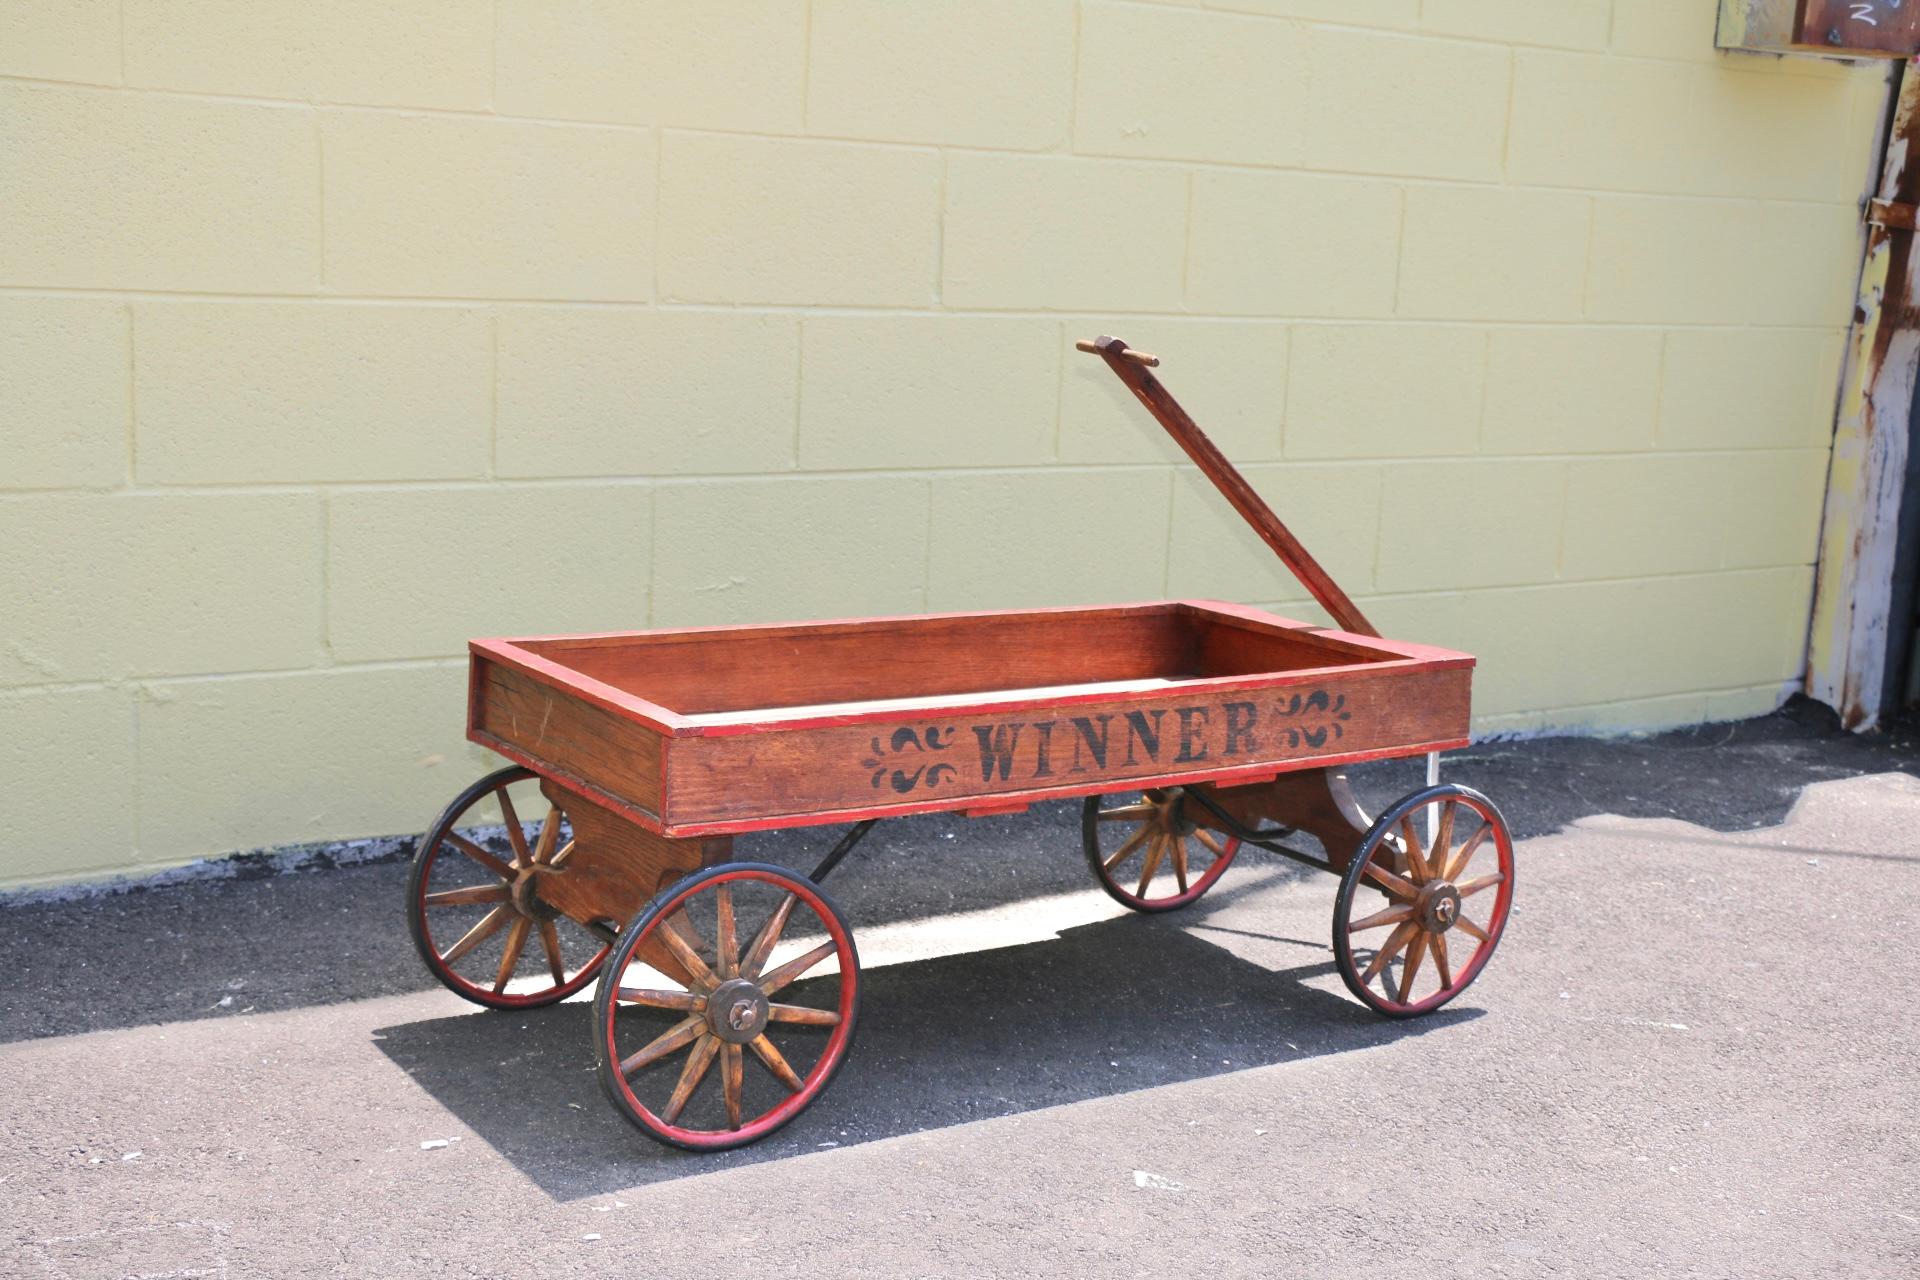 Rustic antique wood wagon from the early 1900’s. Great used condition. Hand painted has nice res accent color. Works well. Can be used for decor.